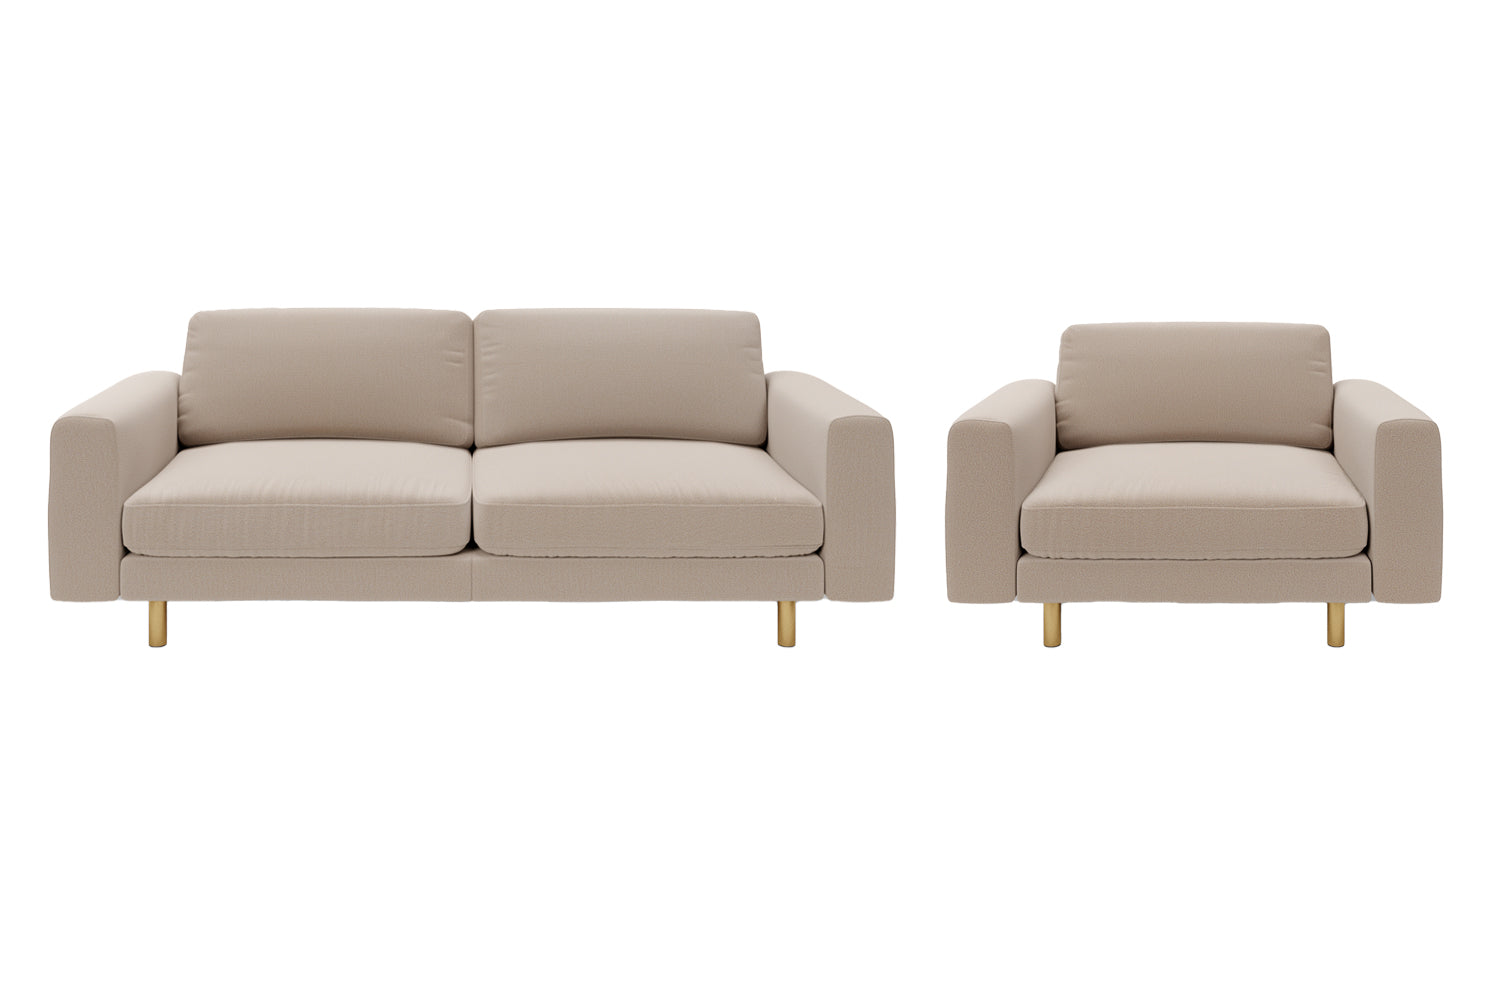 The Big Chill - 3 Seater Sofa and 1.5 Seater Snuggler Set - Oatmeal